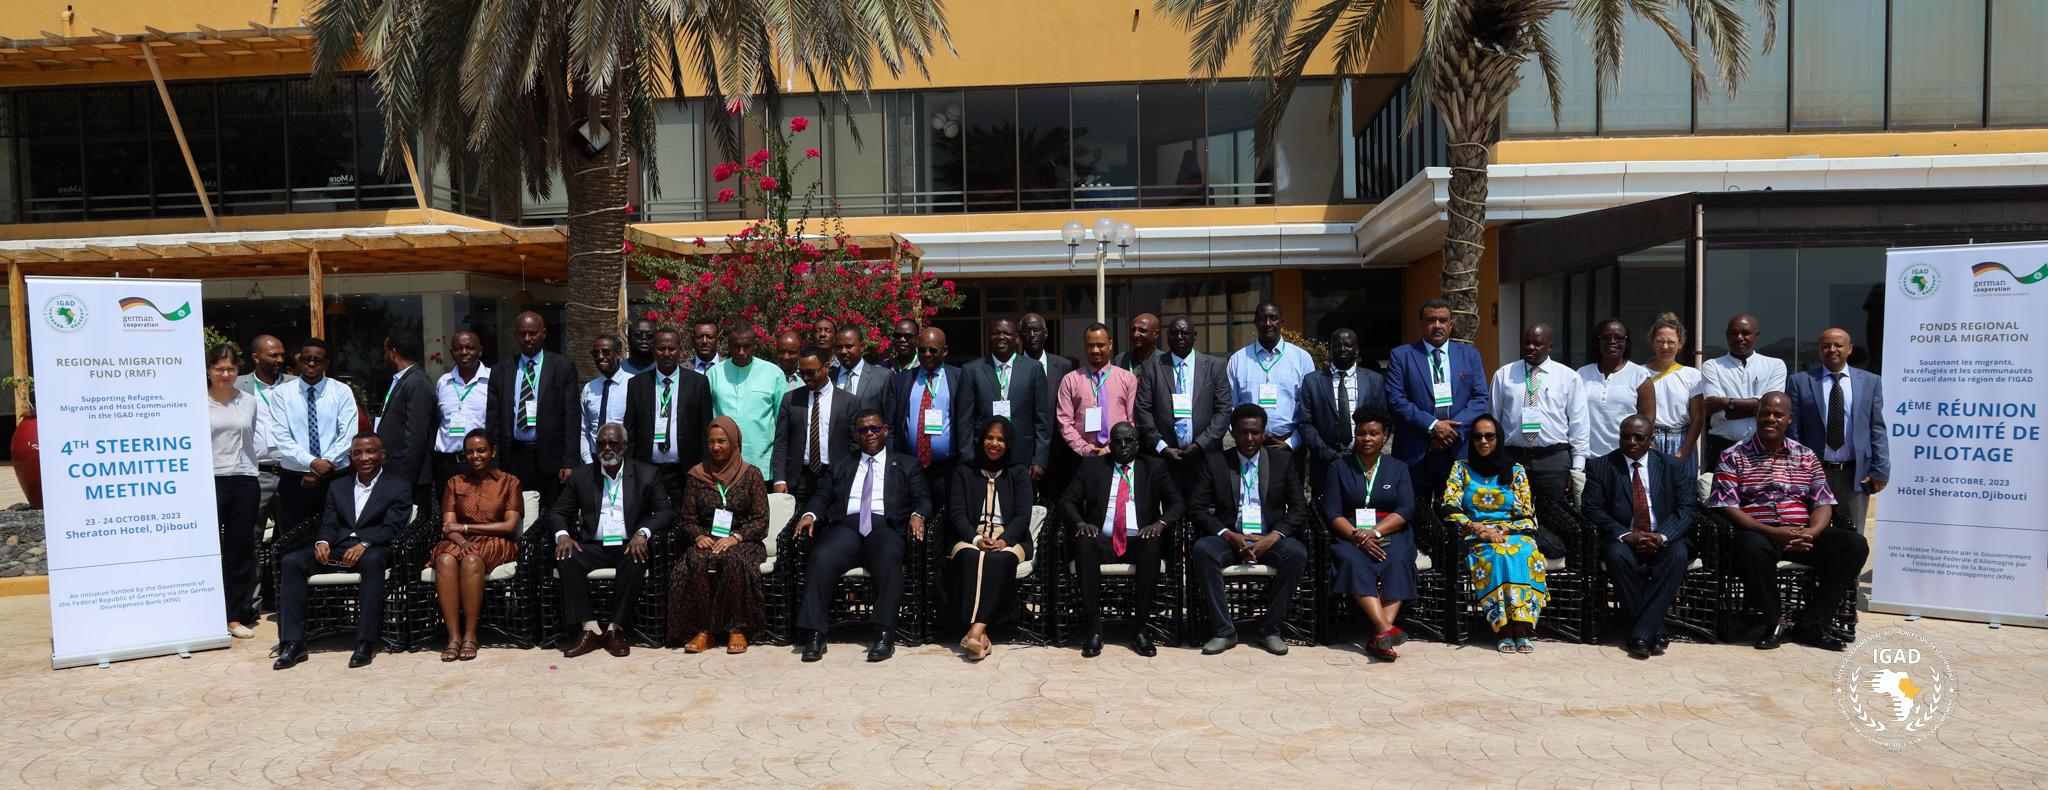 IGAD Conducts the 4th Annual Steering Committee Meeting of Regional Migration Fund